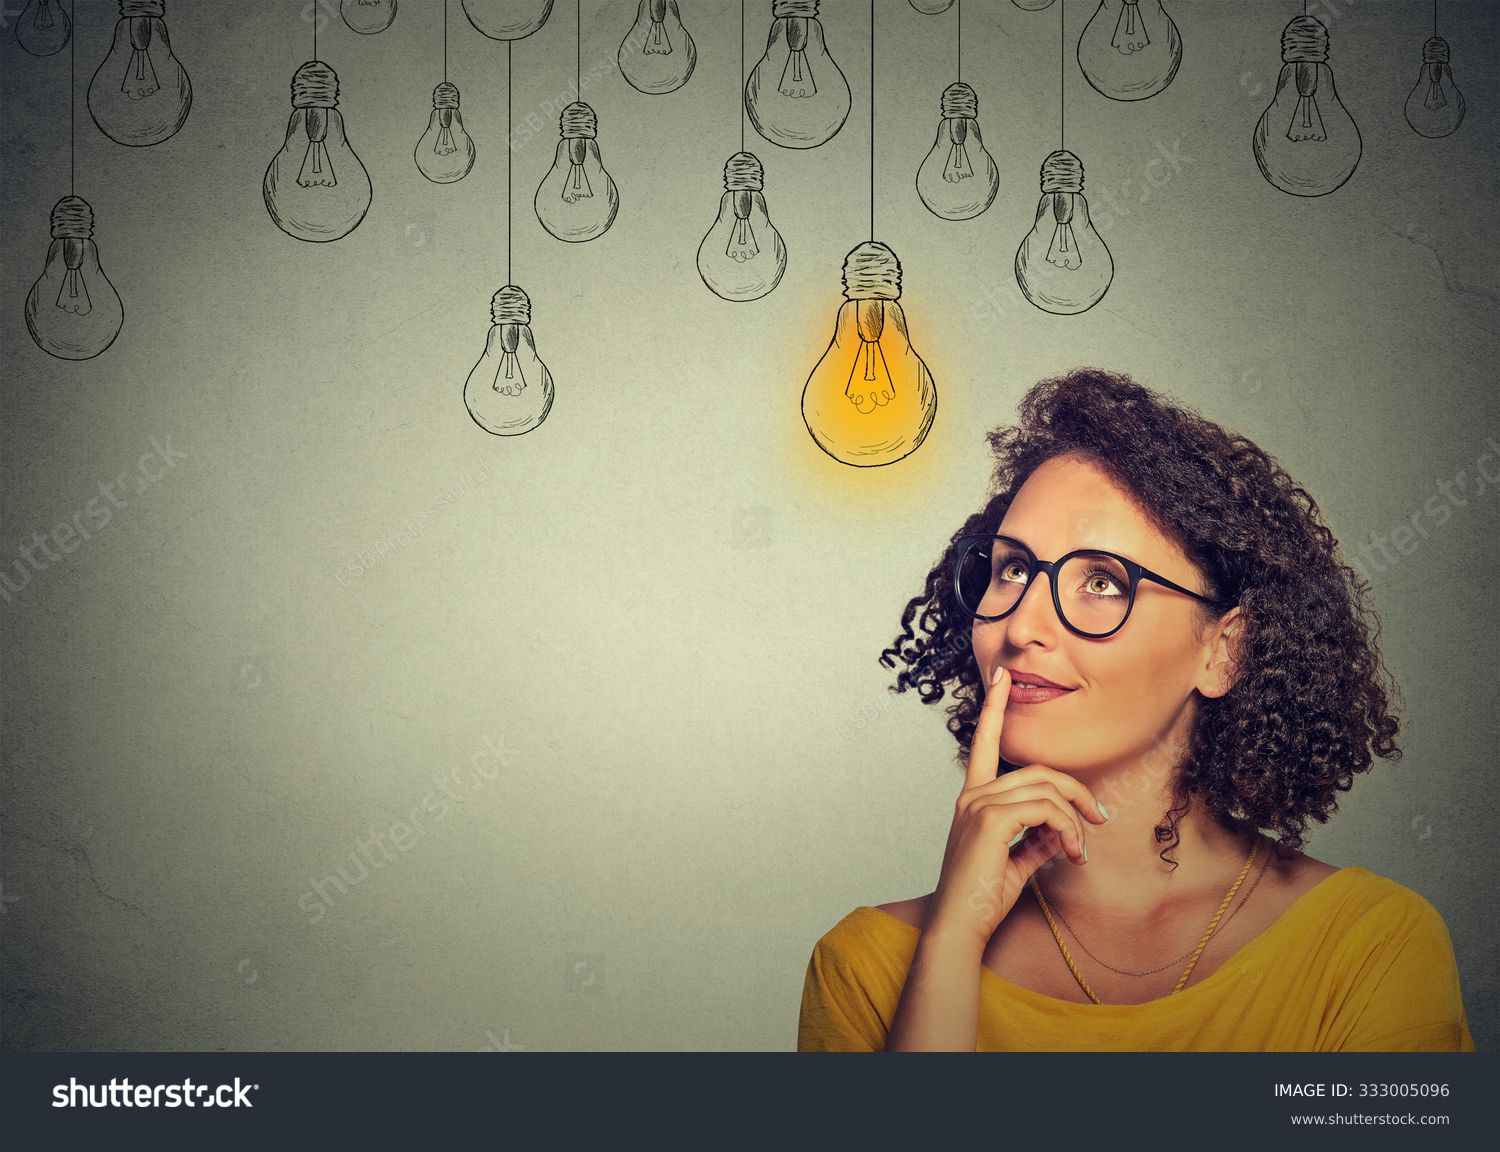 Thinking woman in glasses looking up with light idea bulb above head isolated on gray wall background #333005096